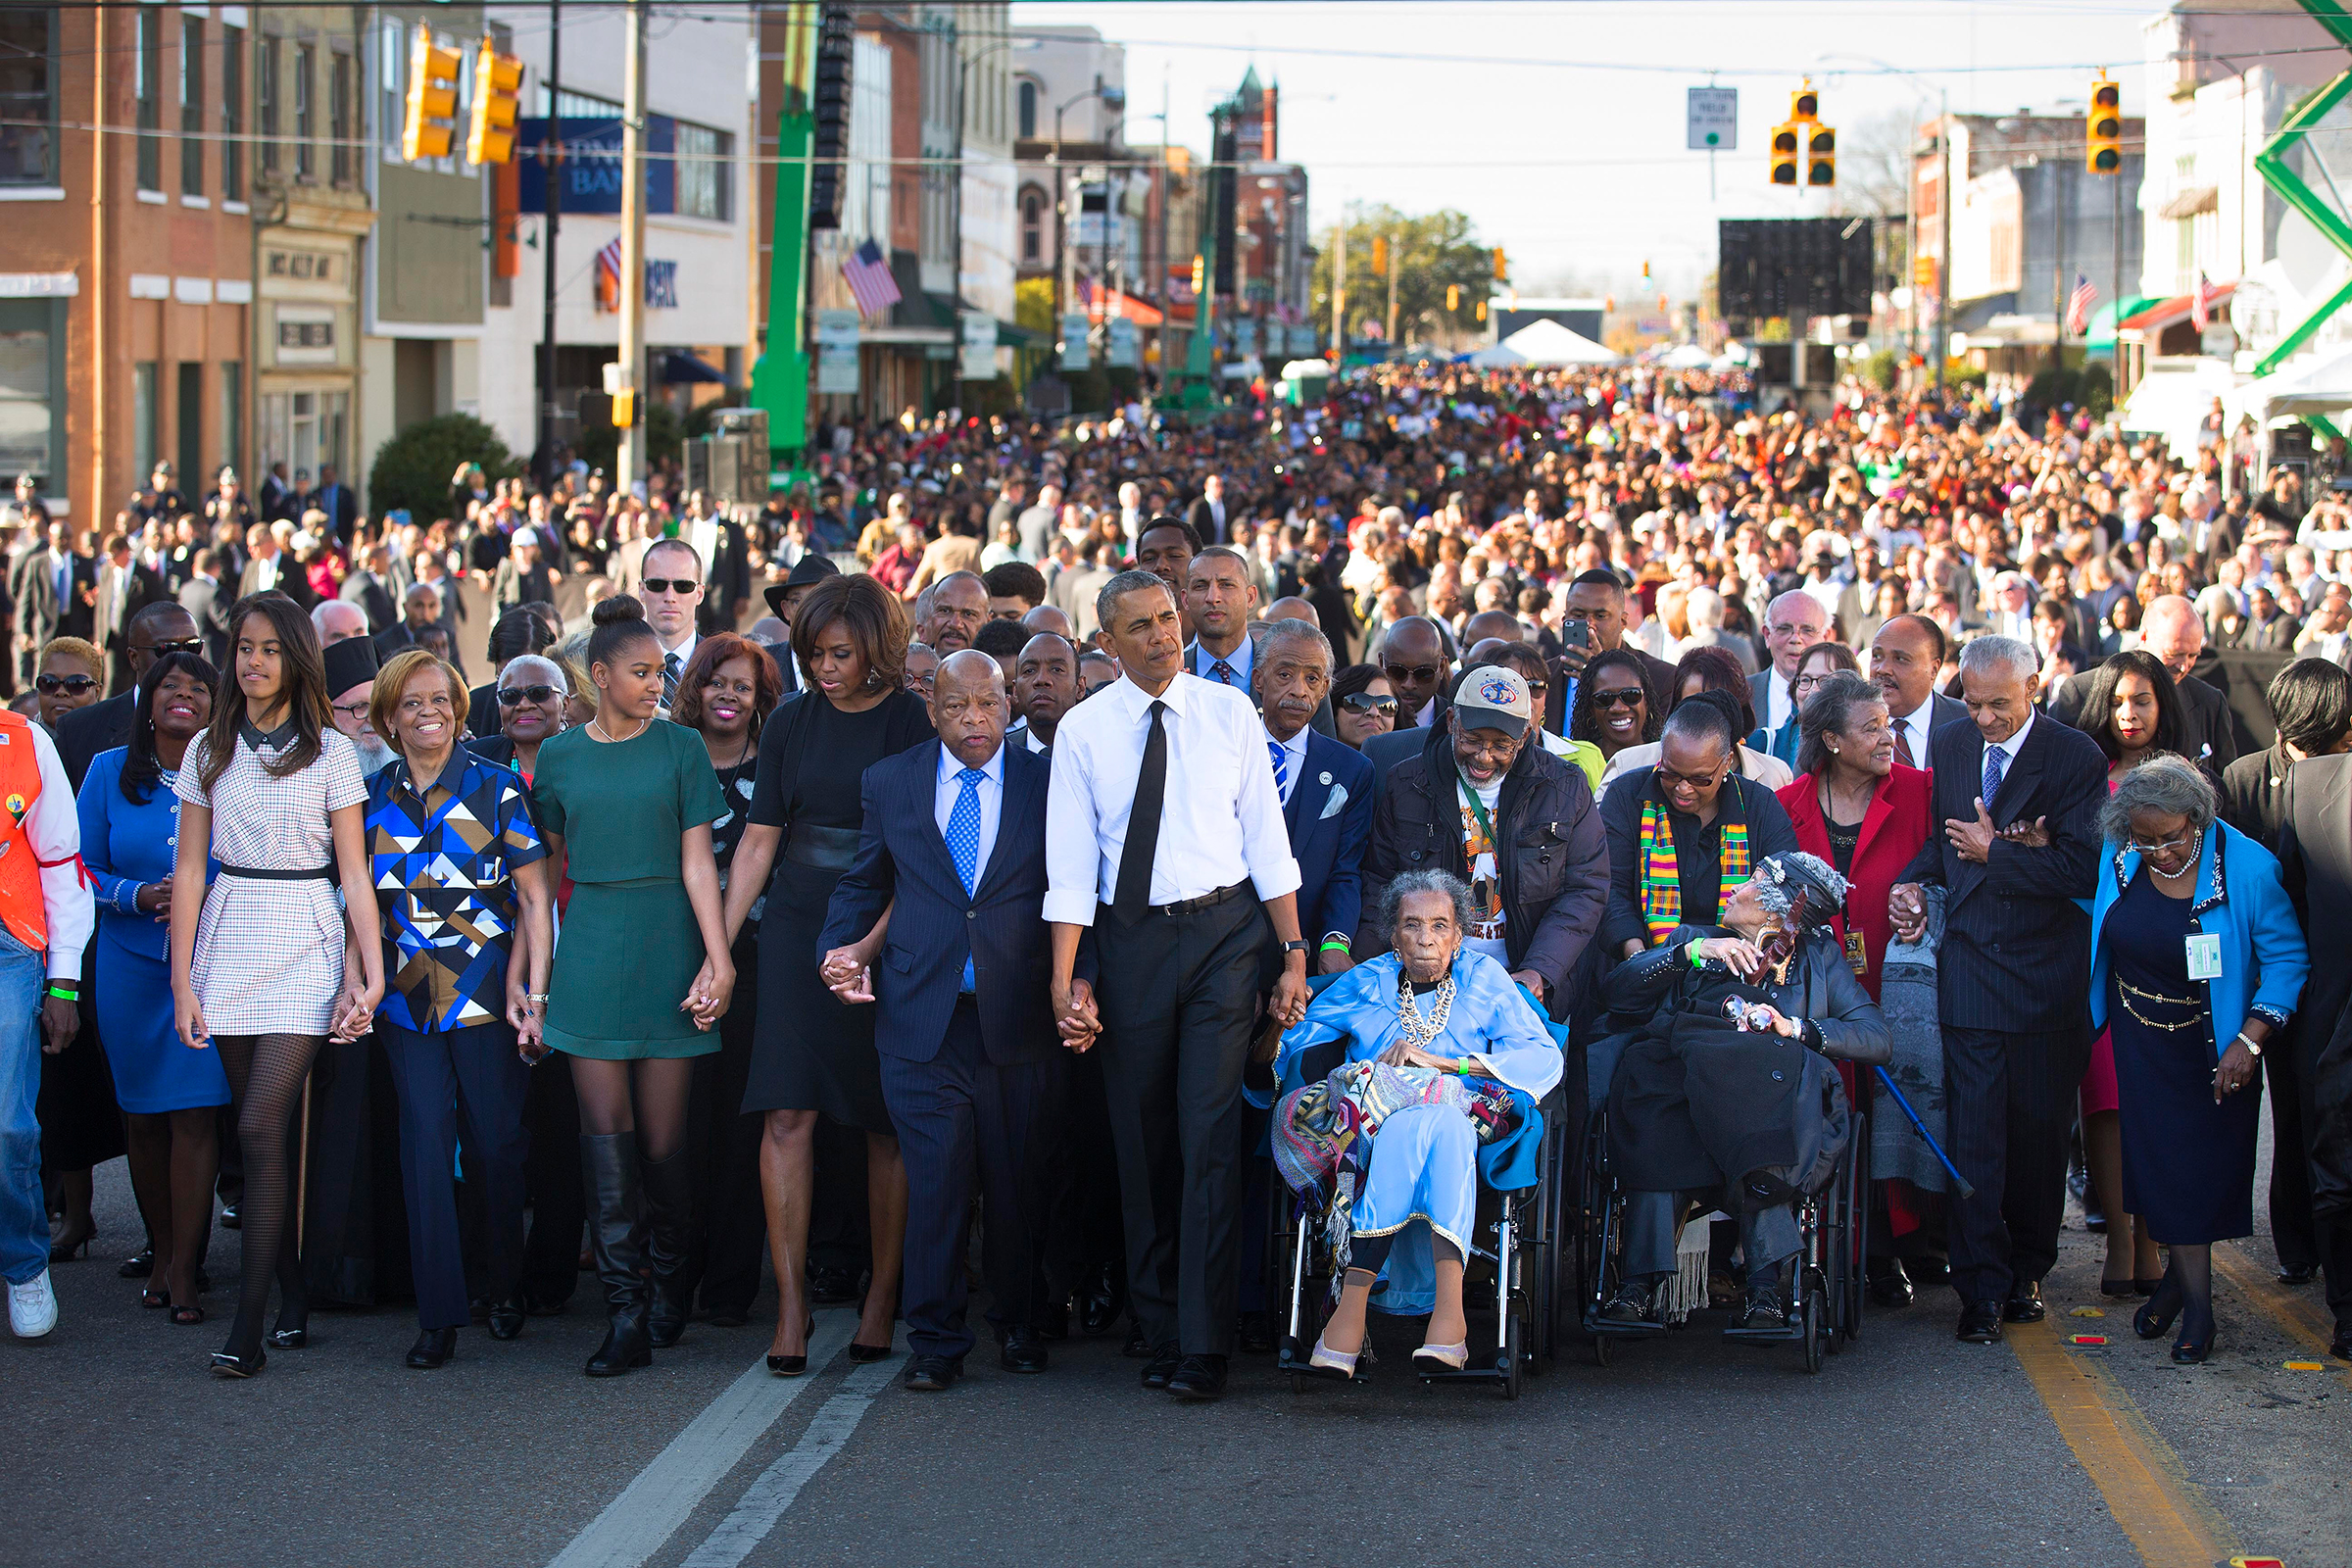 Barack Obama, Amelia Boynton, right, Rep. John Lewis and the President's family lead a march toward the Edmund Pettus Bridge in Selma, Ala., on March 7, 2015, 50 years after "Bloody Sunday."